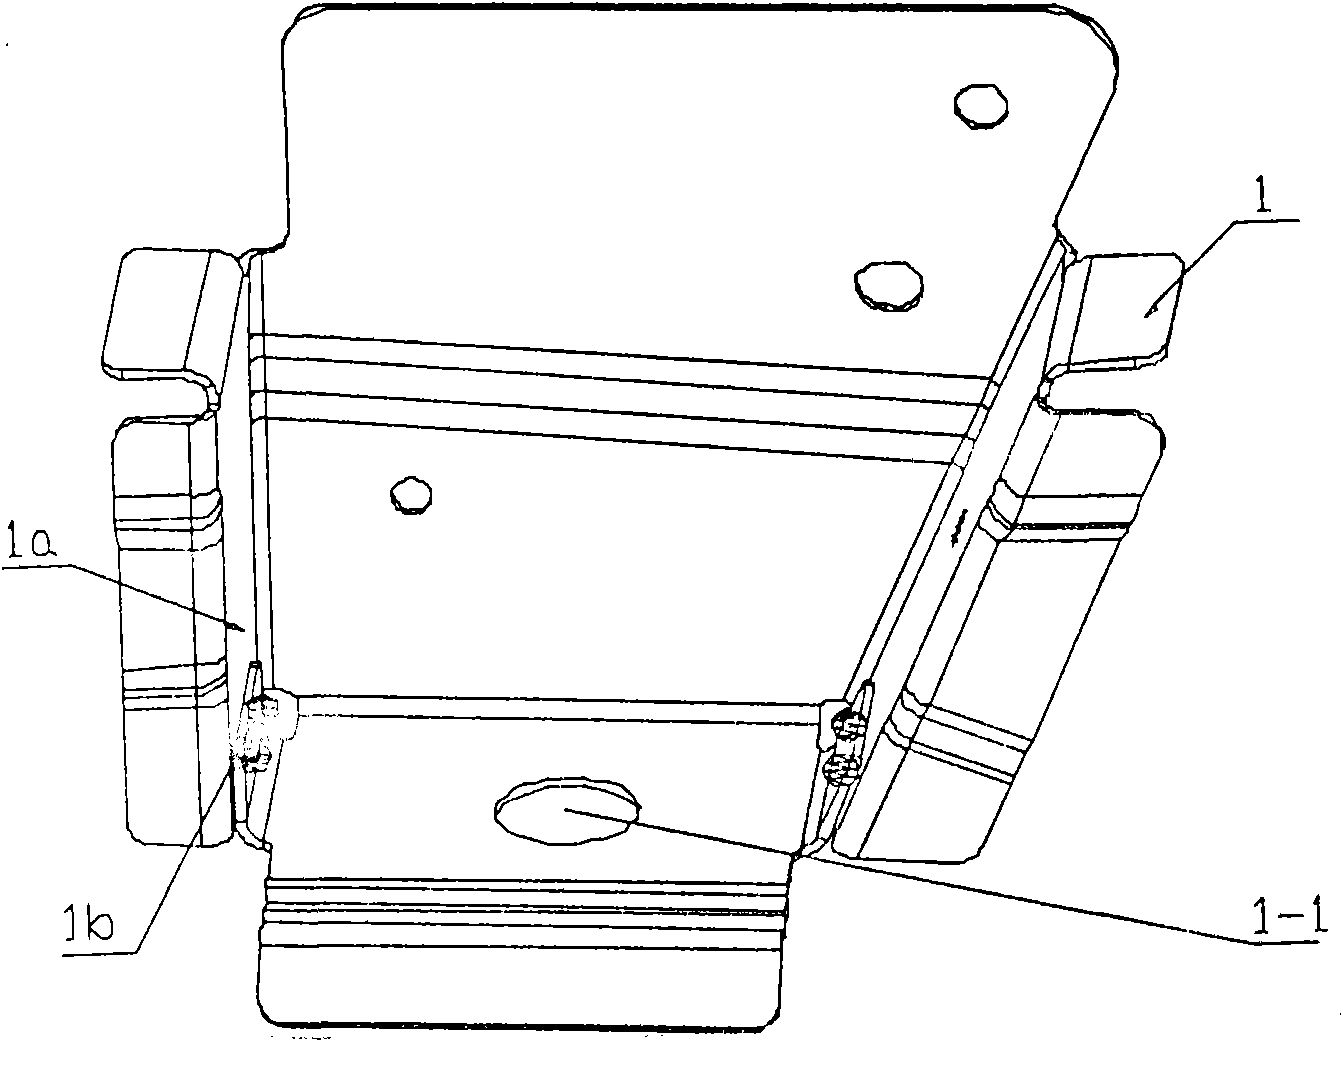 Engine bracket front mounting structure